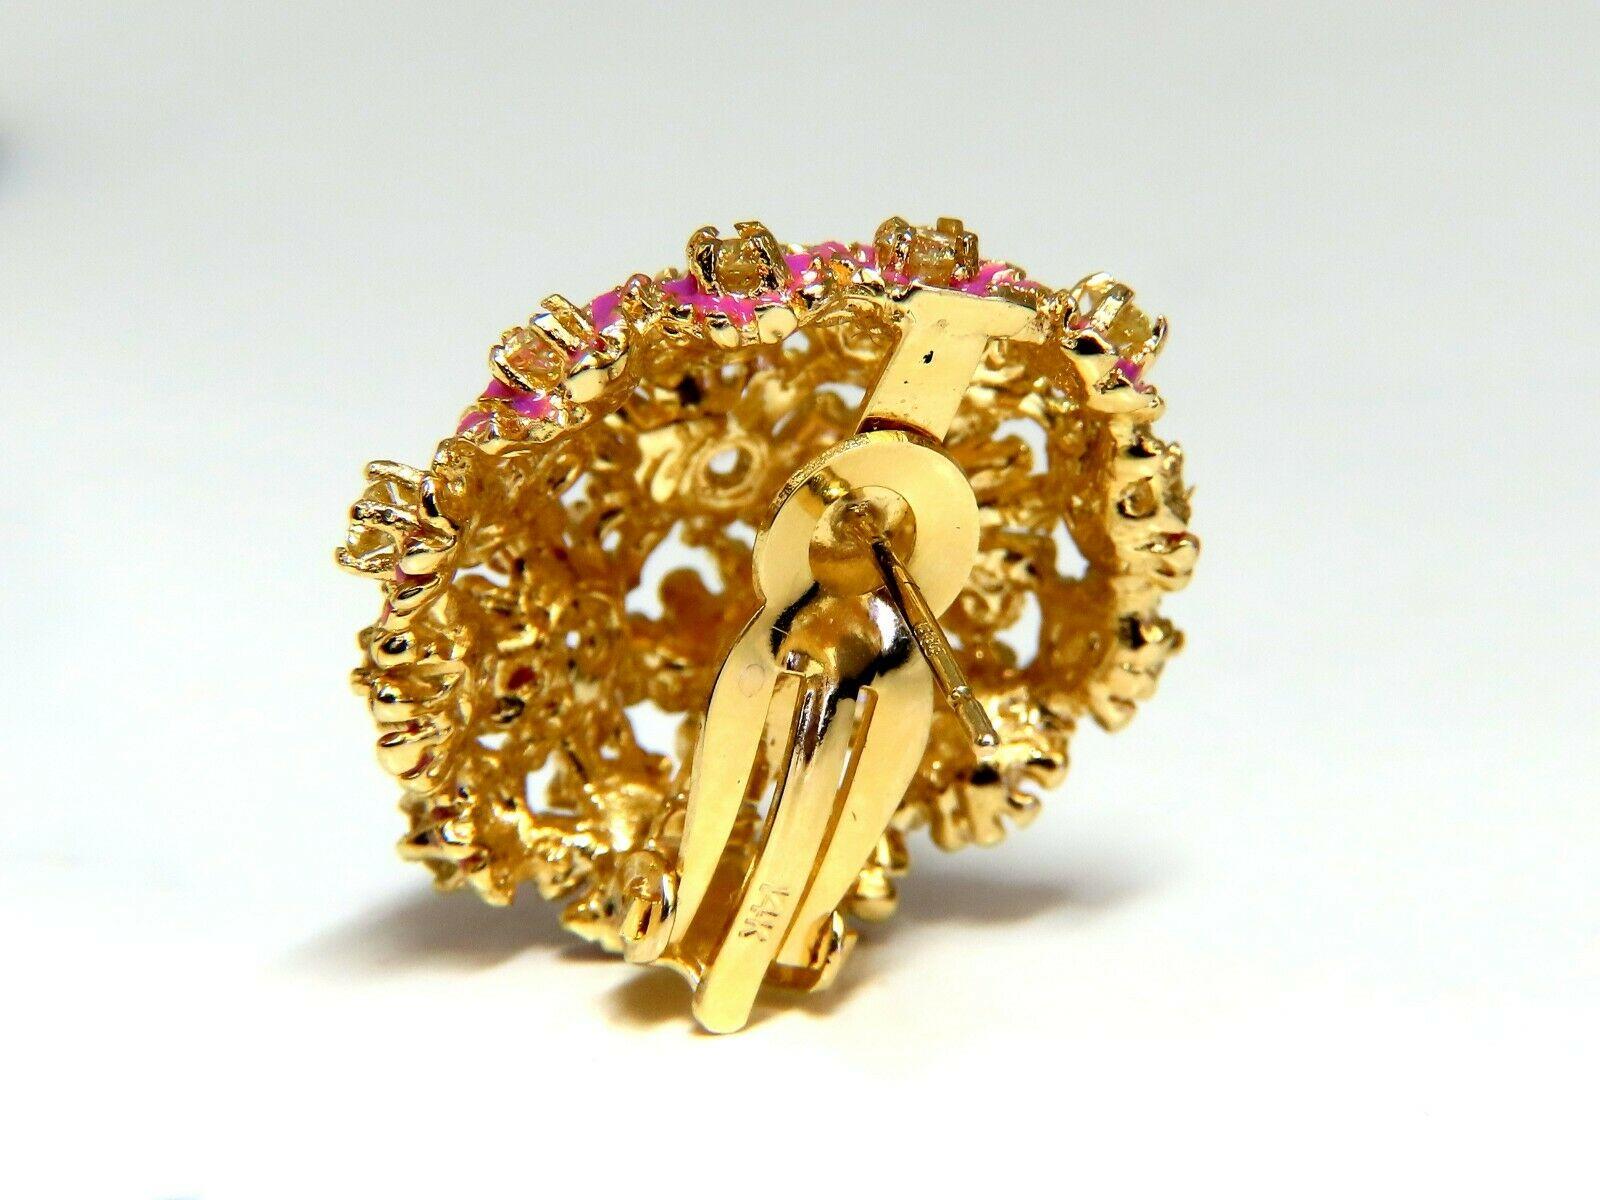 Floral Domed Cluster Clip Earrings.

1.52cts of natural fancy yellow diamonds: 

Rounds, Full Cut Brilliants

 Vs-2  clarity.

14kt. yellow gold

16.3 grams.

Earrings measure: .90 inch Diameter

Pink Enamel within petals

$5,000 Appraisal